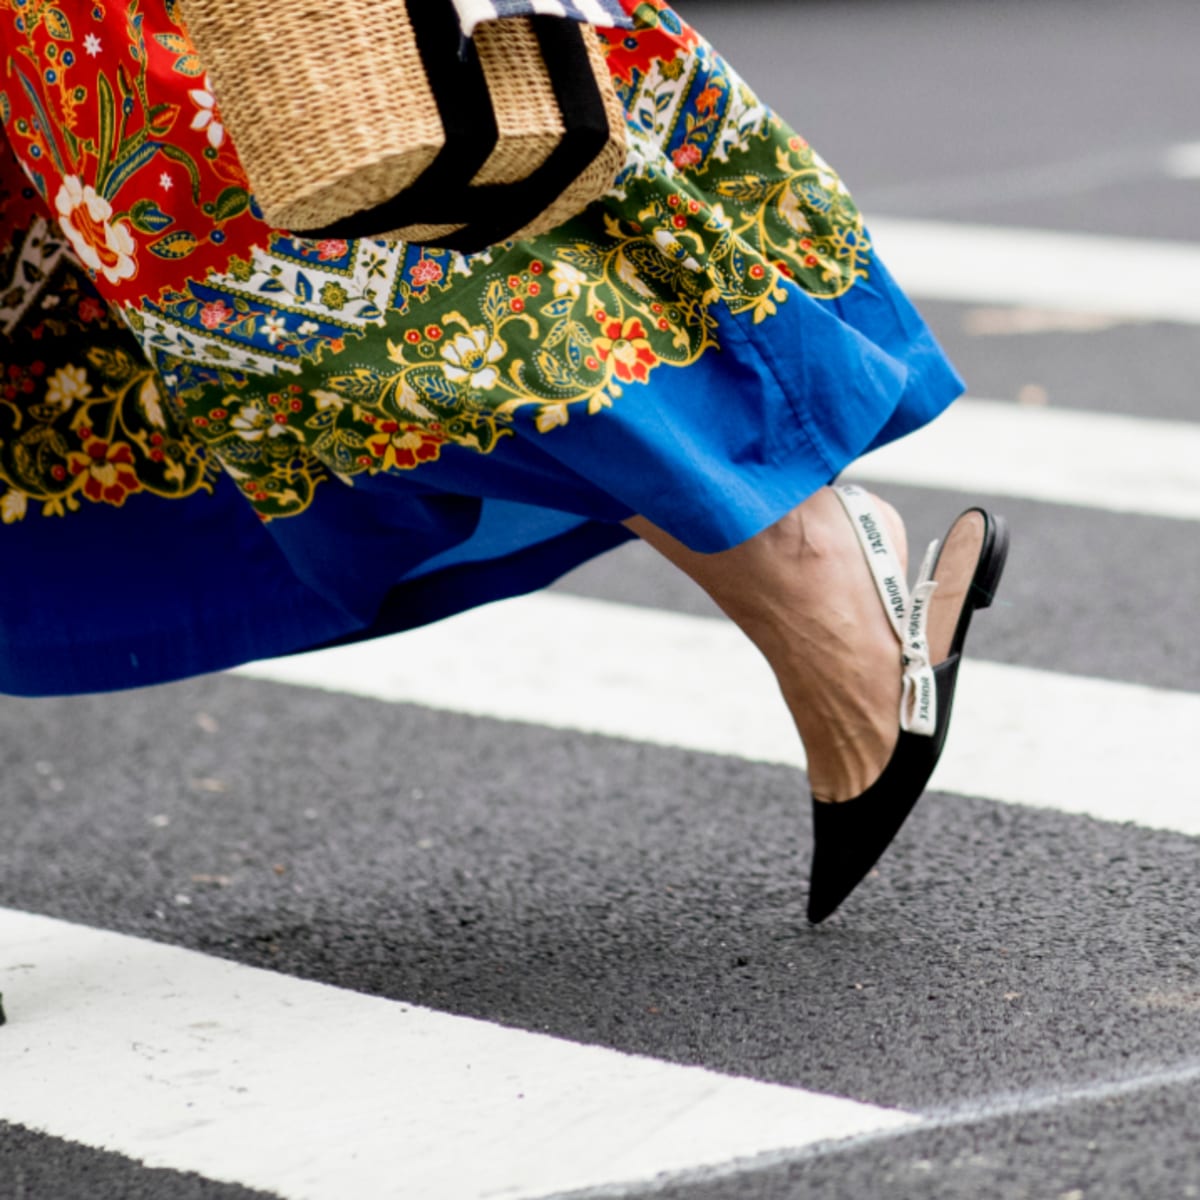 21 Pointed-Toe Flats to Put Some Spring in Your Step - Fashionista